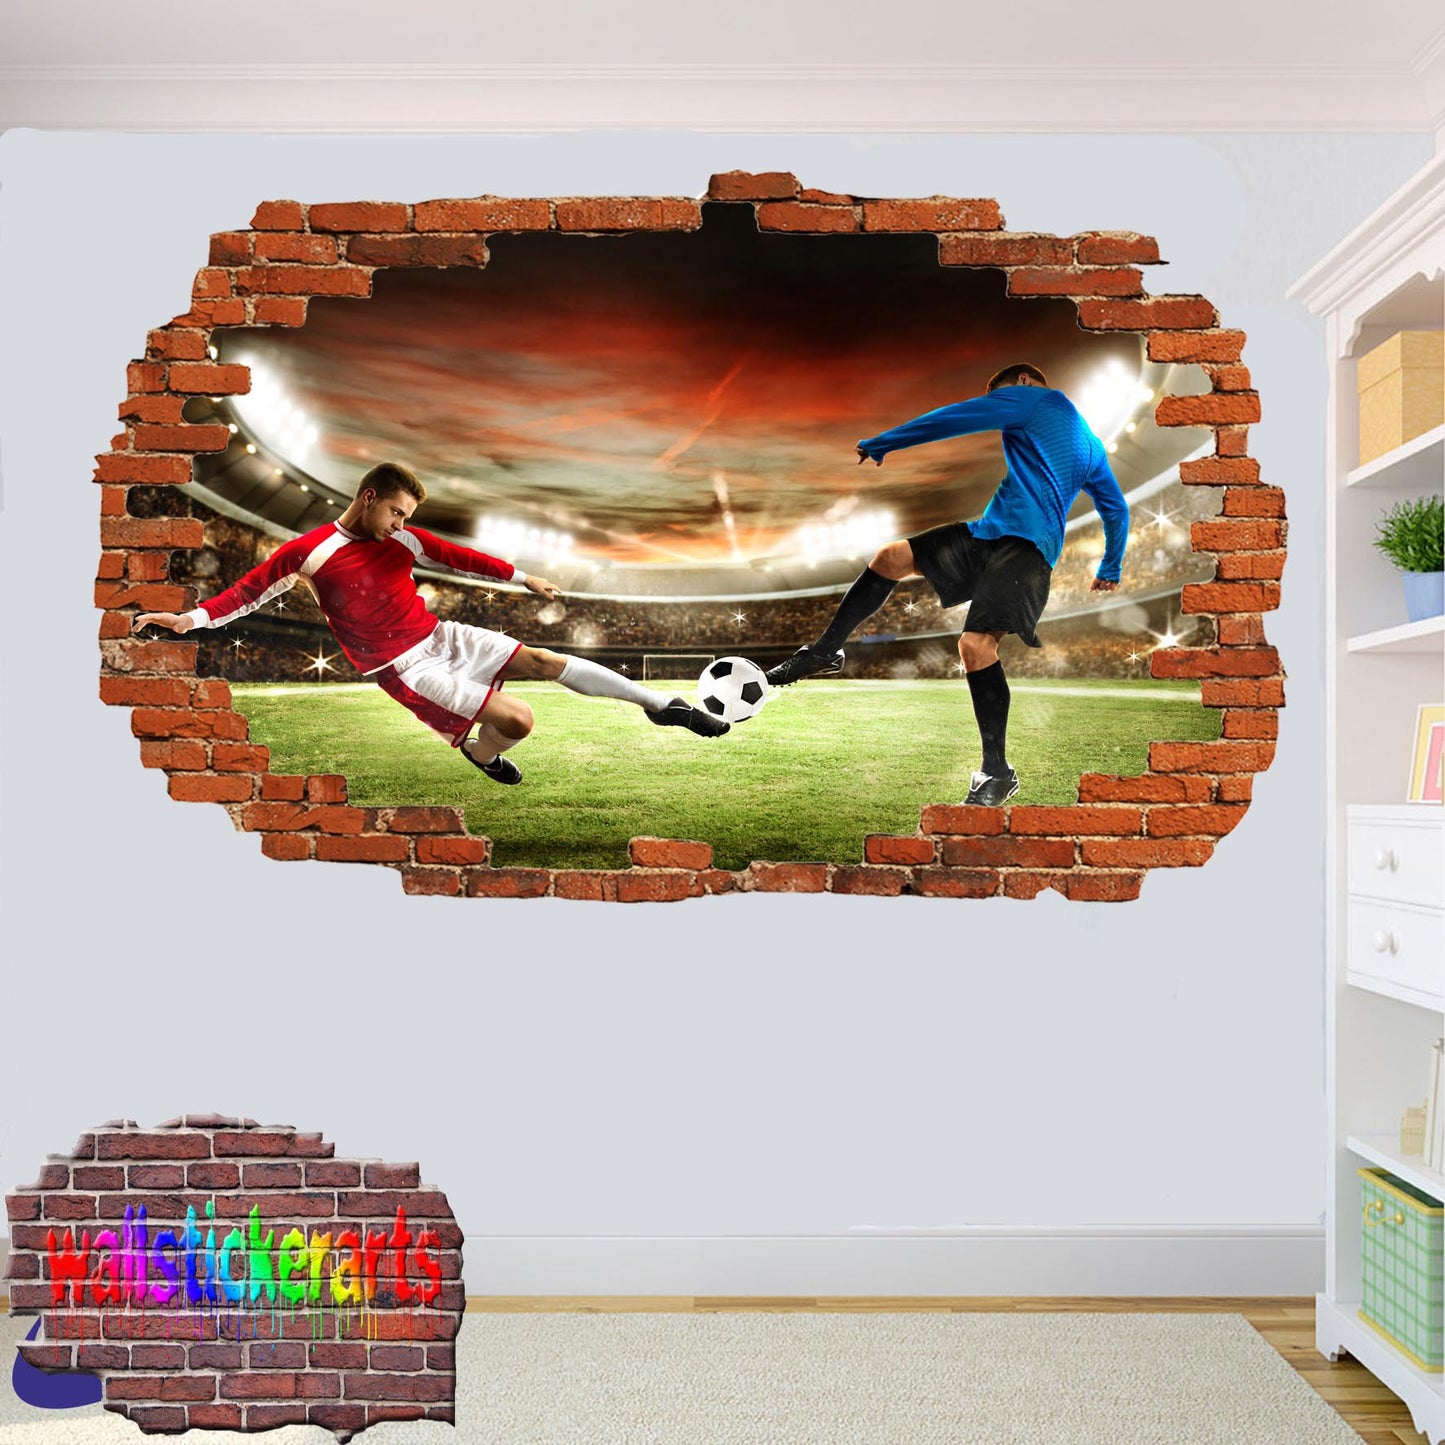 Football Players on Pitch Sports 3d Effect Wall Sticker Room Office Nursery Shop Decoration Decal Mural YO3